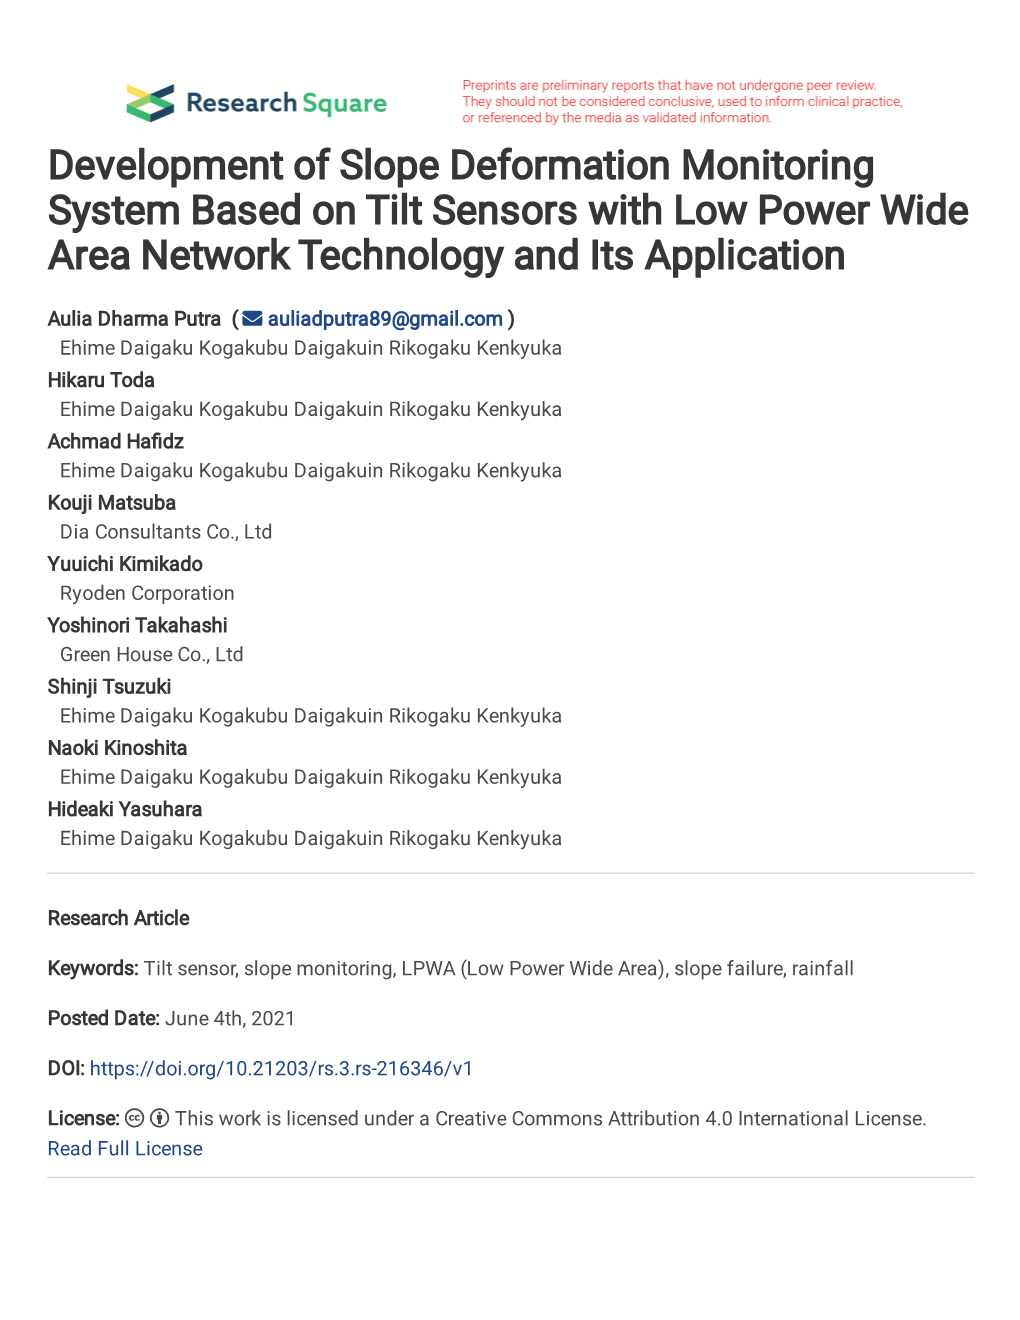 Development of Slope Deformation Monitoring System Based on Tilt Sensors with Low Power Wide Area Network Technology and Its Application